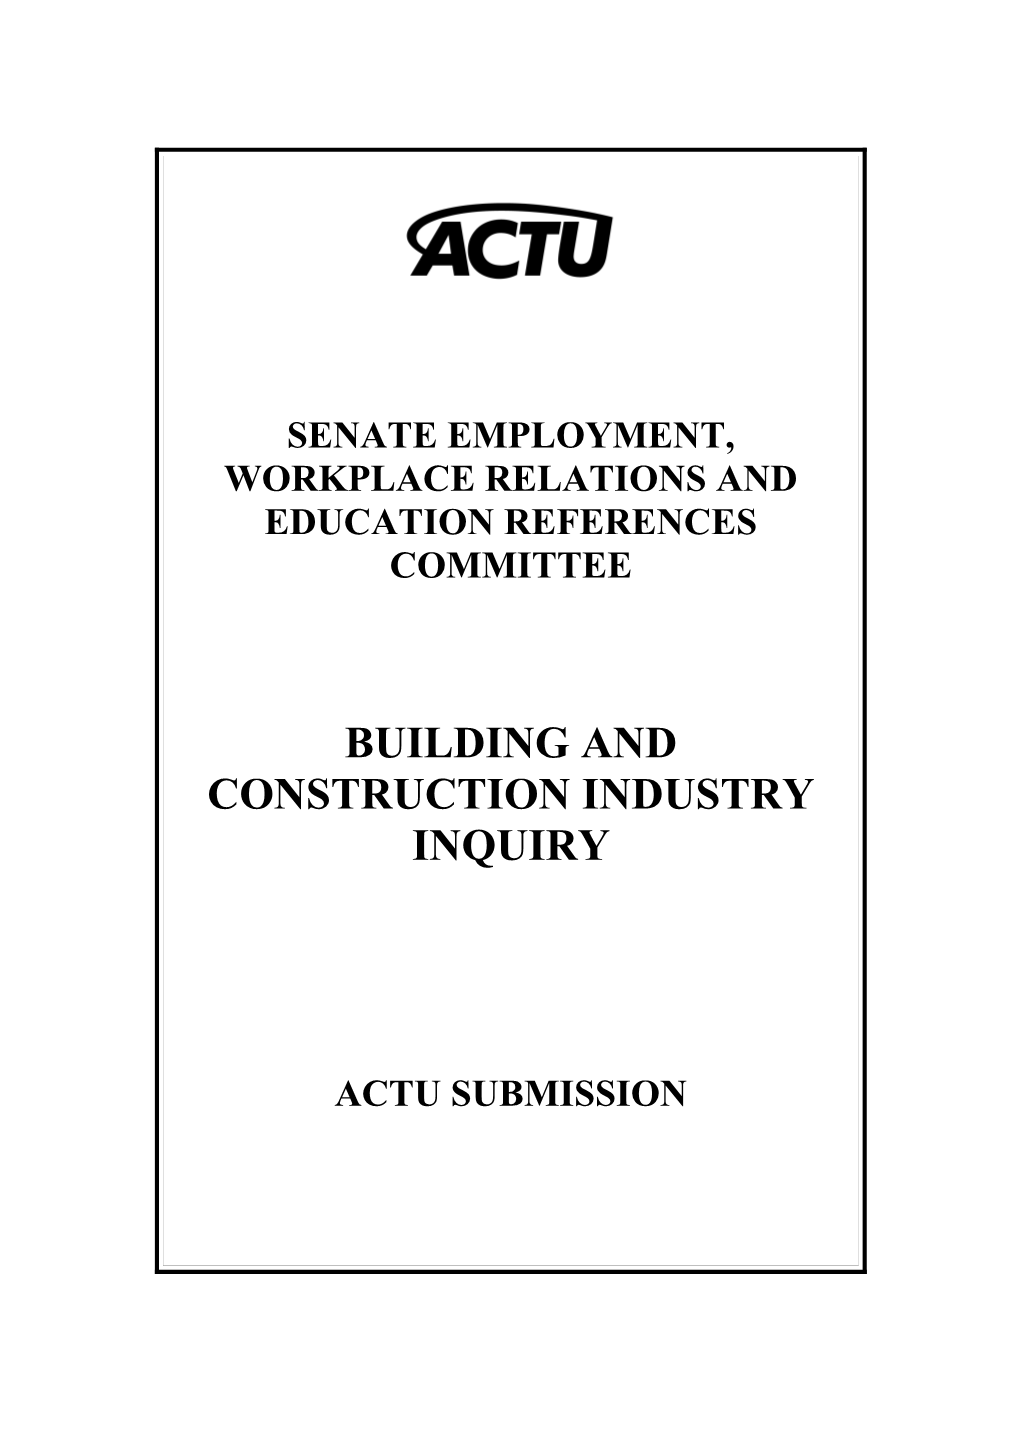 Senate Employment, Workplace Relations and Education References Committee